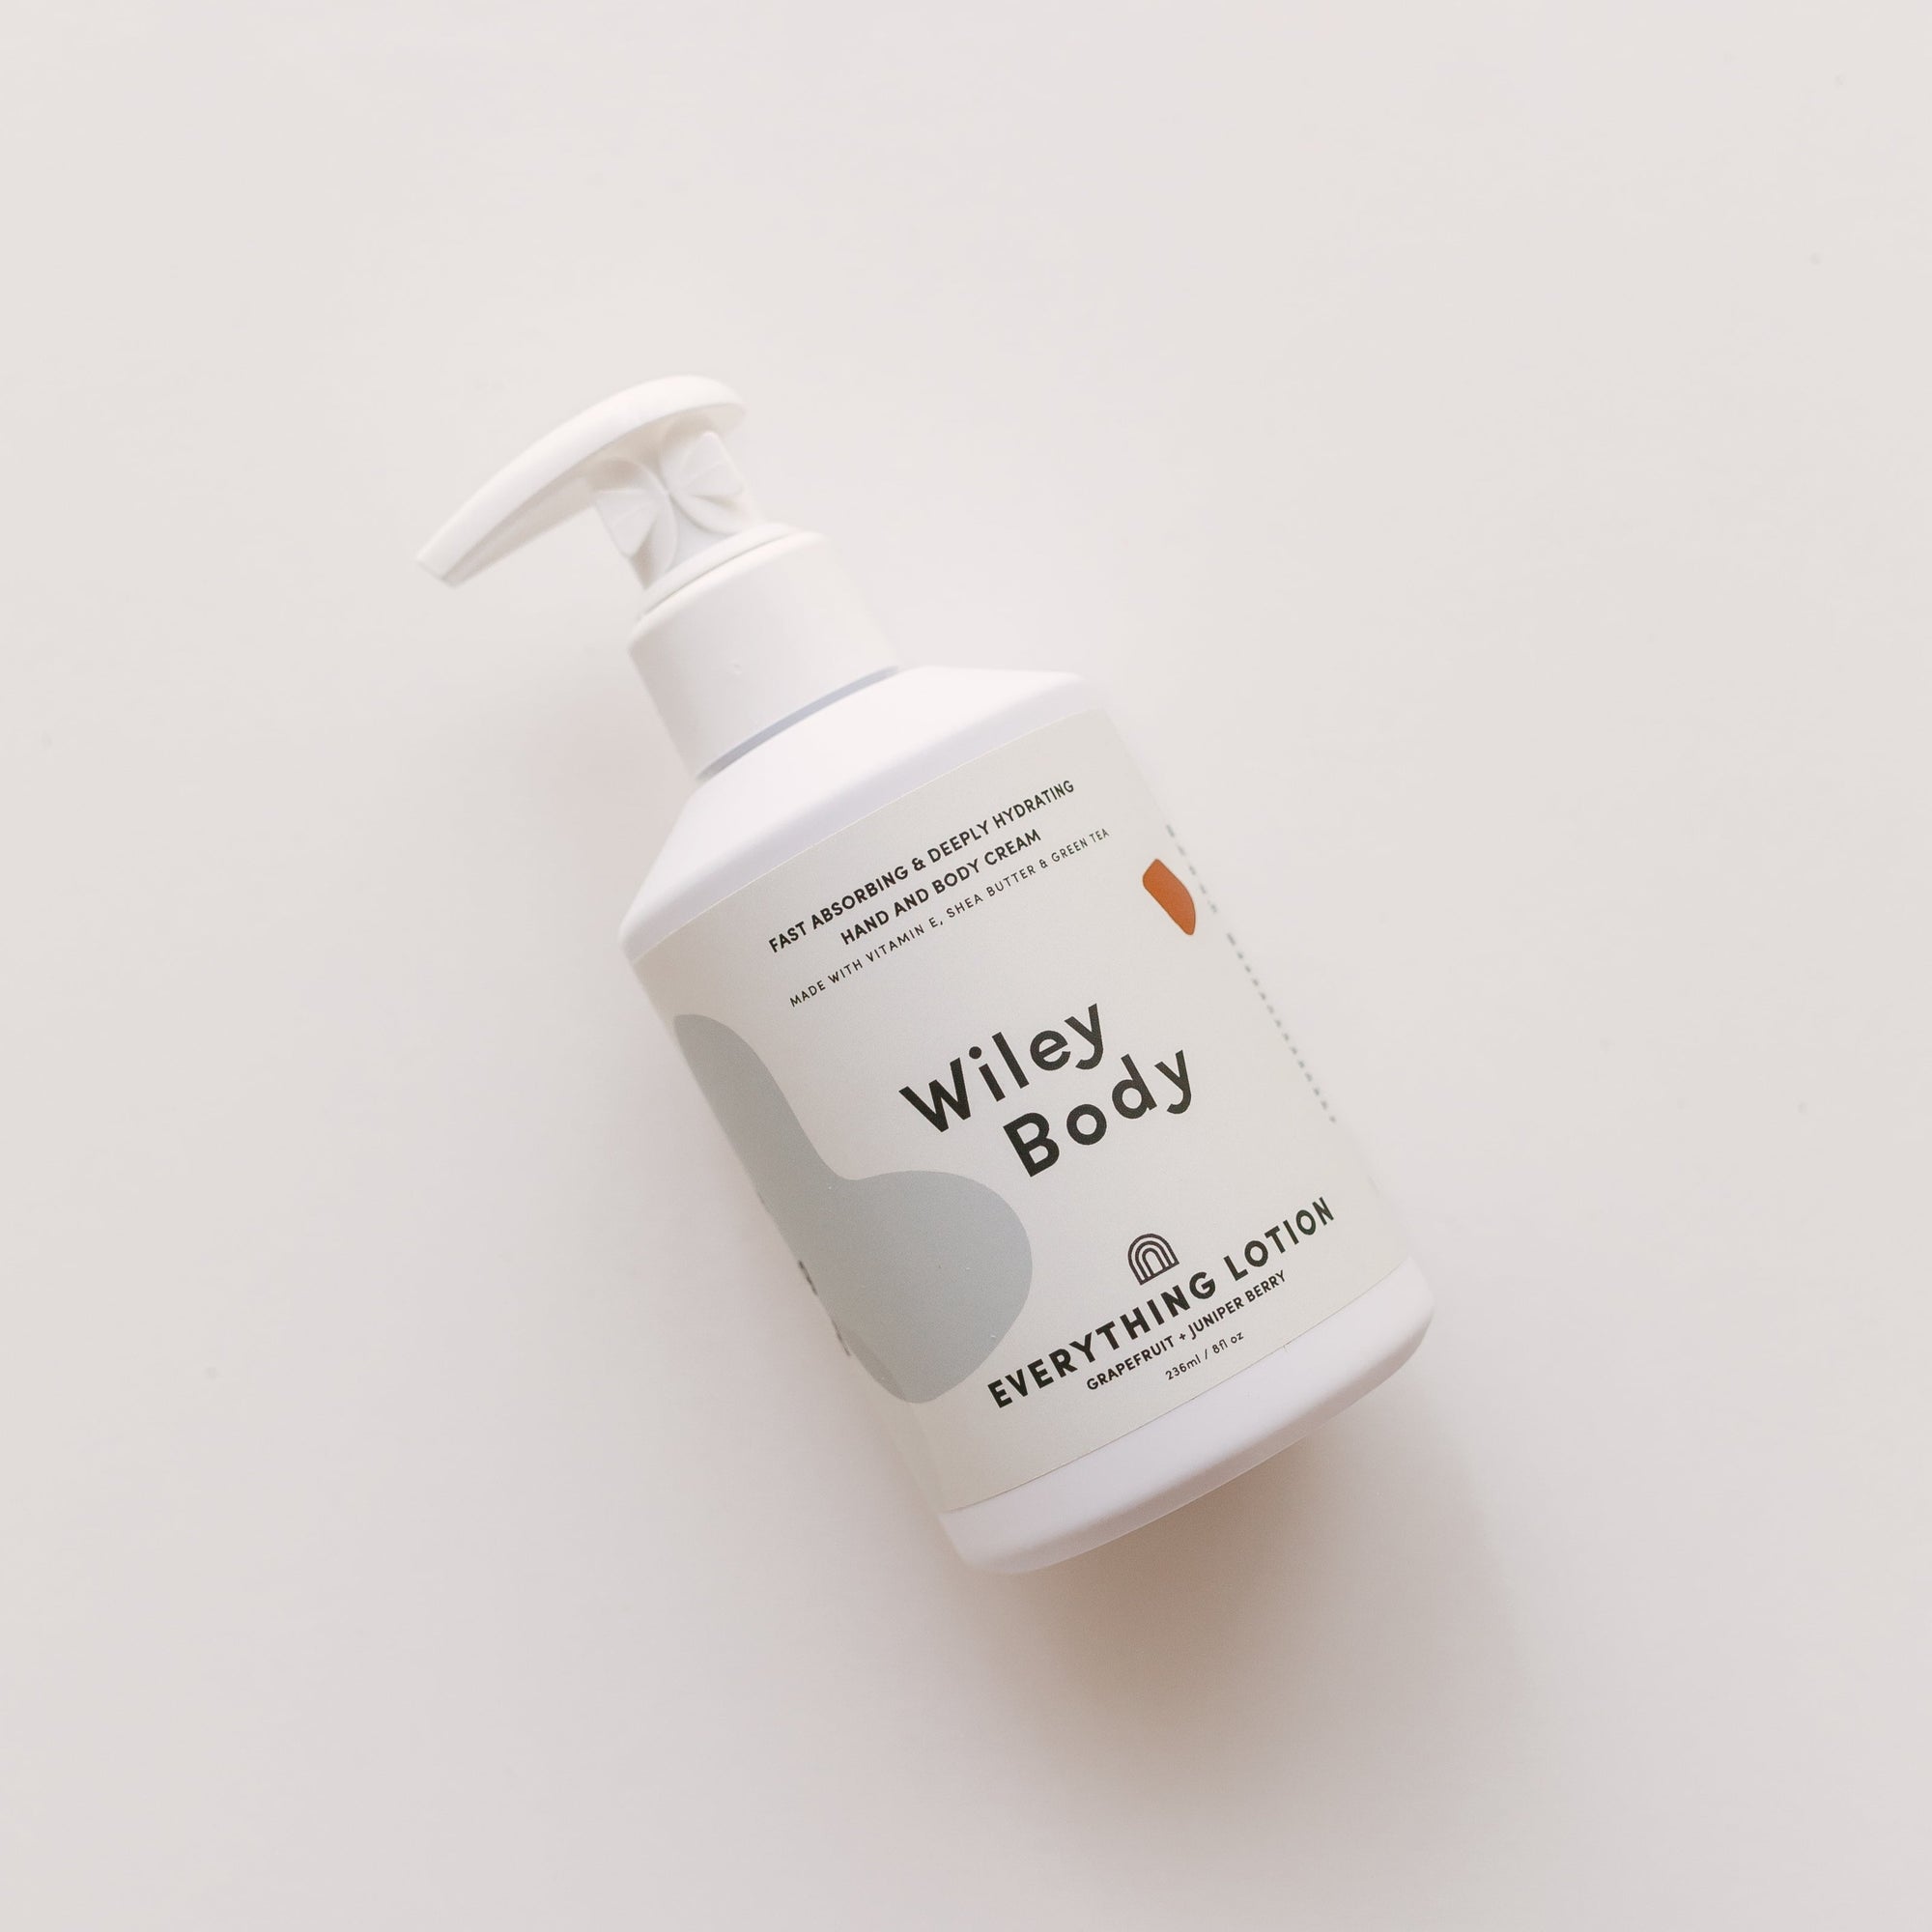 A lightweight bottle of Wiley Body's everything lotion, designed to hydrate and improve skincare, resting on a white surface.